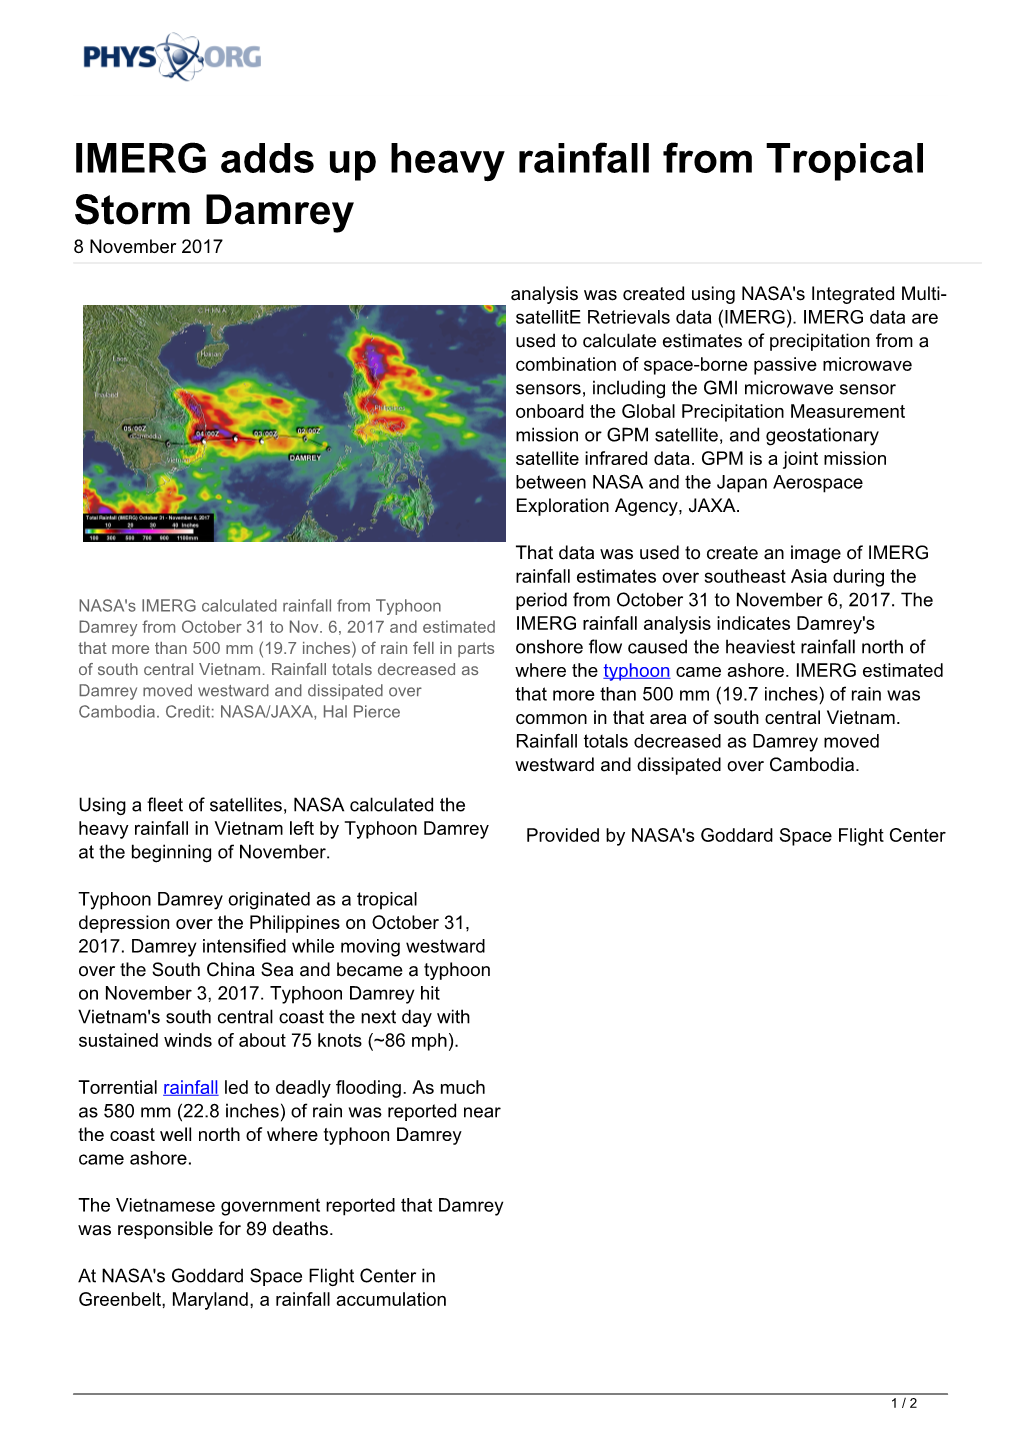 IMERG Adds up Heavy Rainfall from Tropical Storm Damrey 8 November 2017